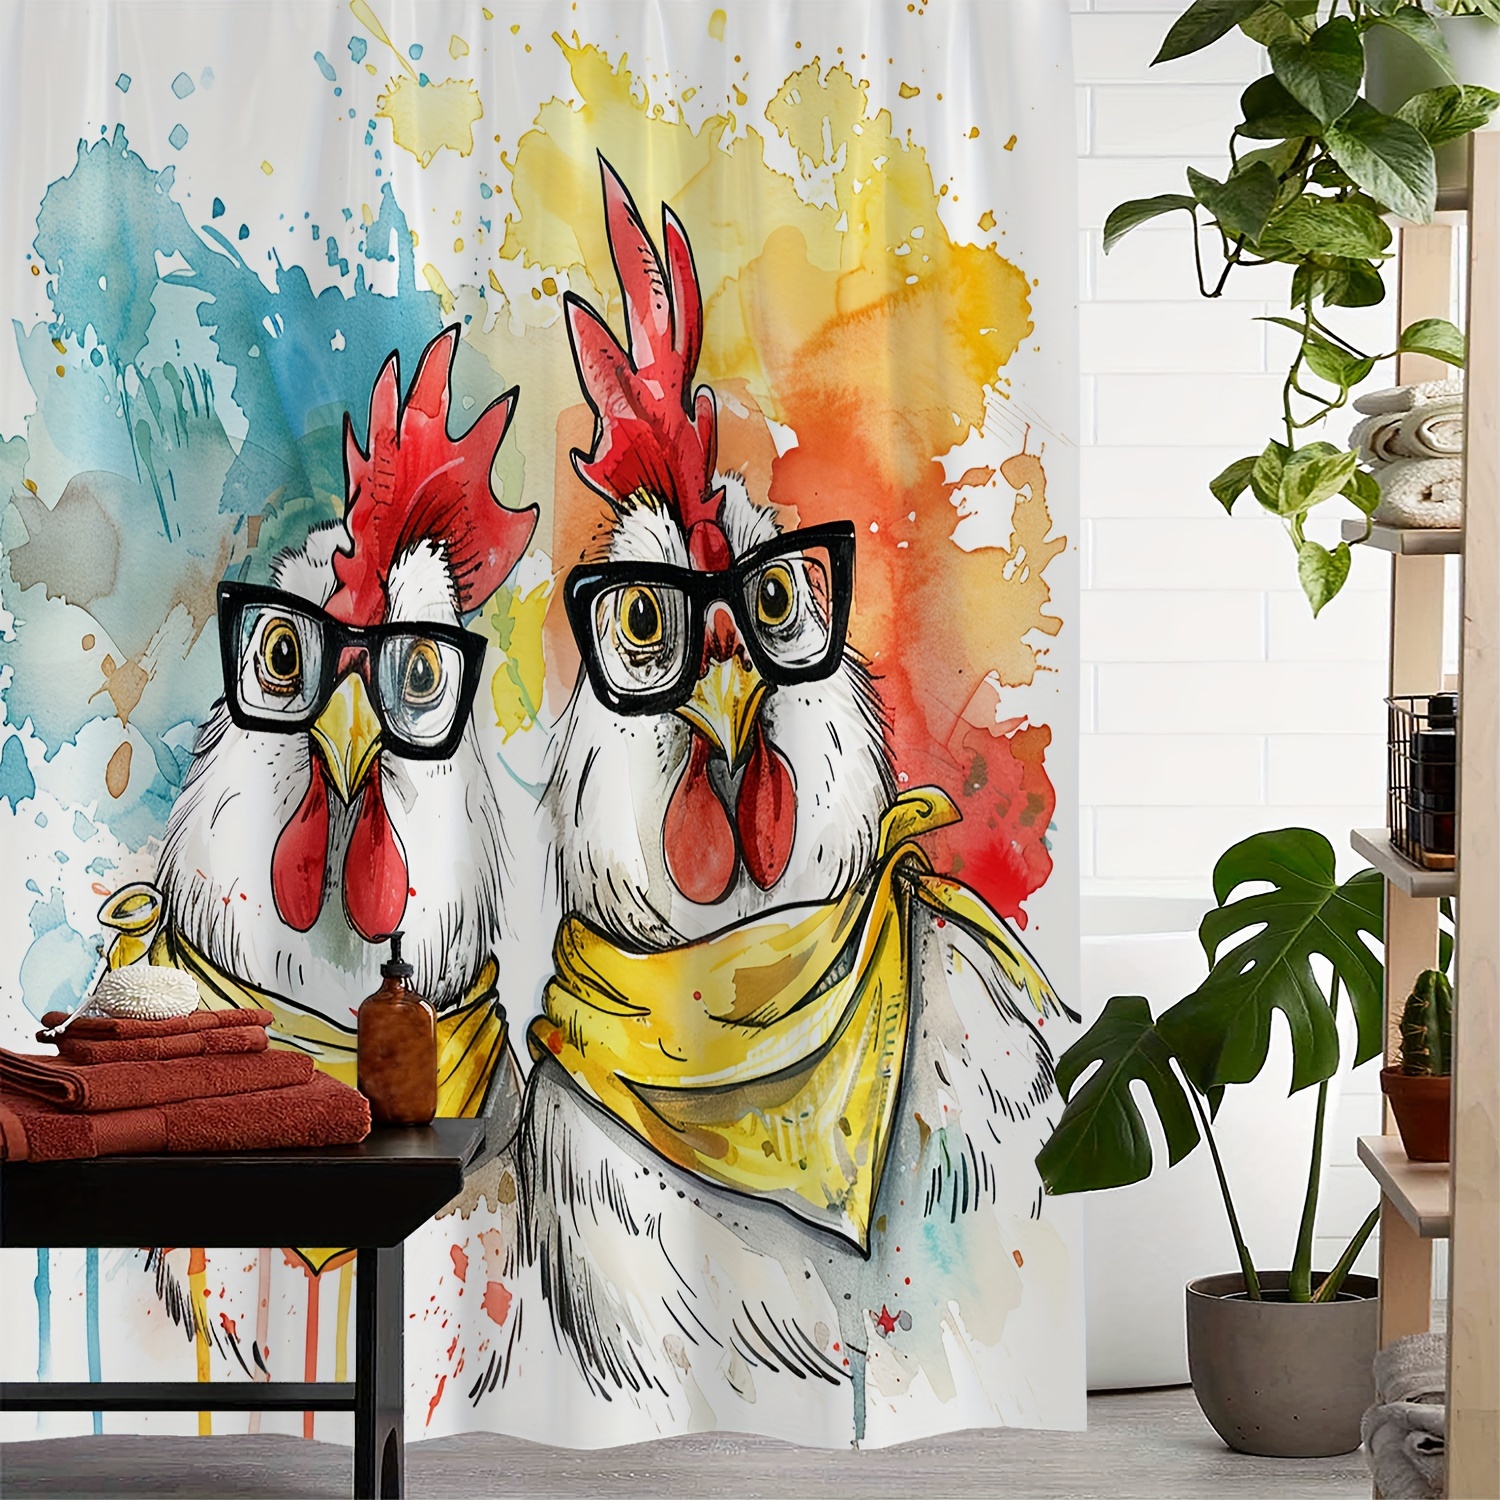 

Water-resistant Polyester Shower Curtain With Chick Print, Machine Washable, Includes 12 Hooks, Woven Arts Pattern, Animal Theme - 72x72 Inches